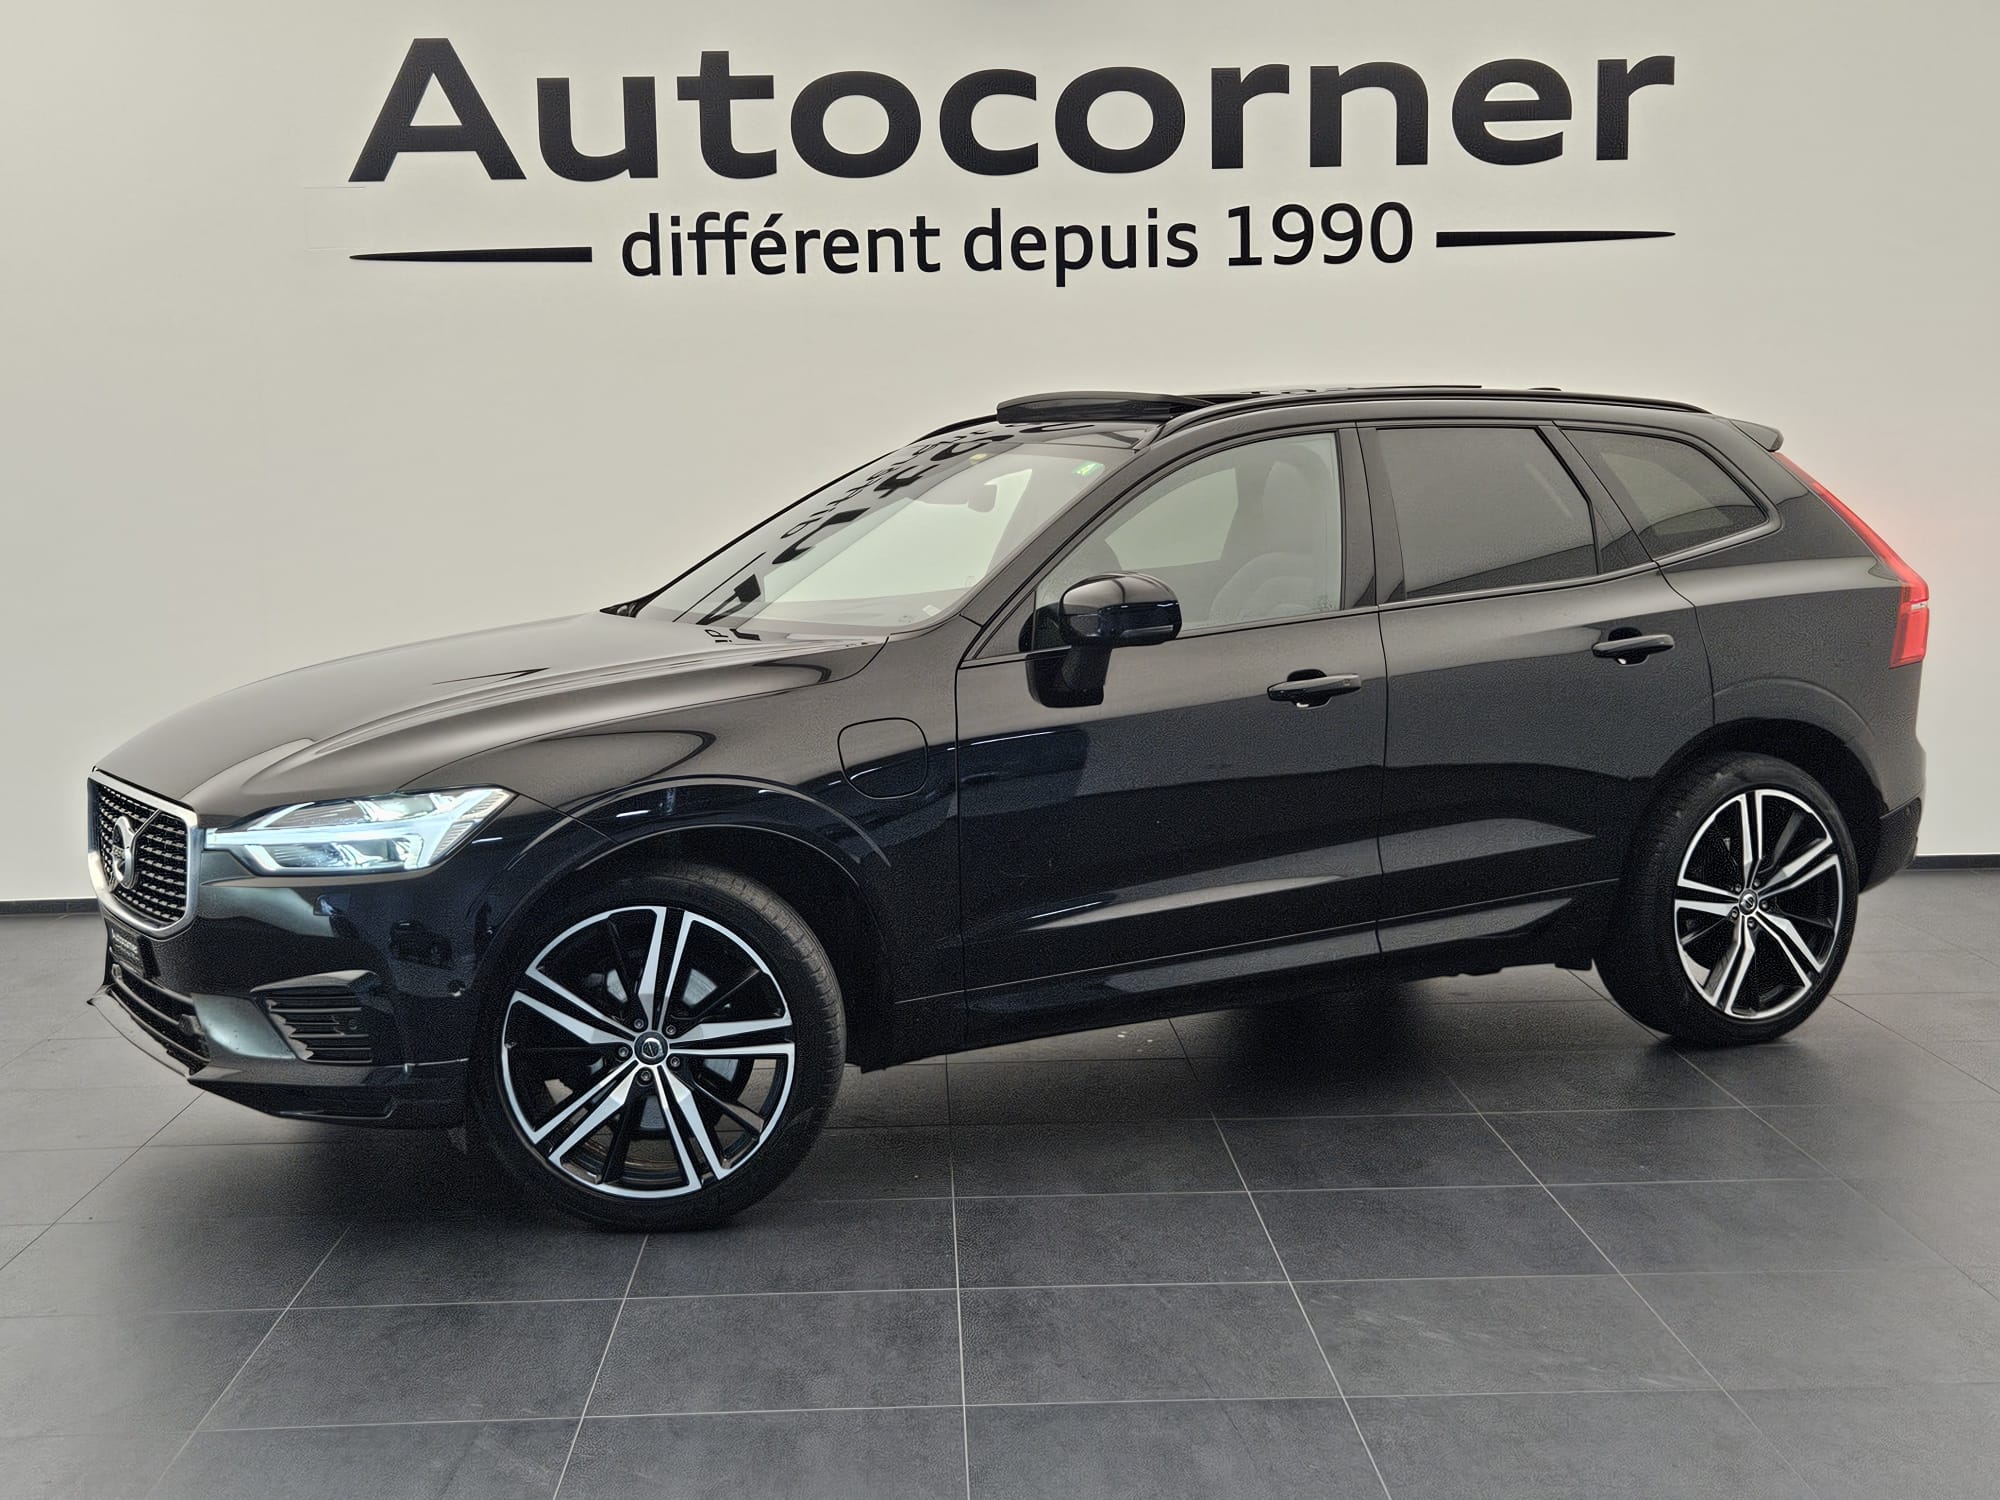 VOLVO XC60 T8 eAWD R-Design Geartronic